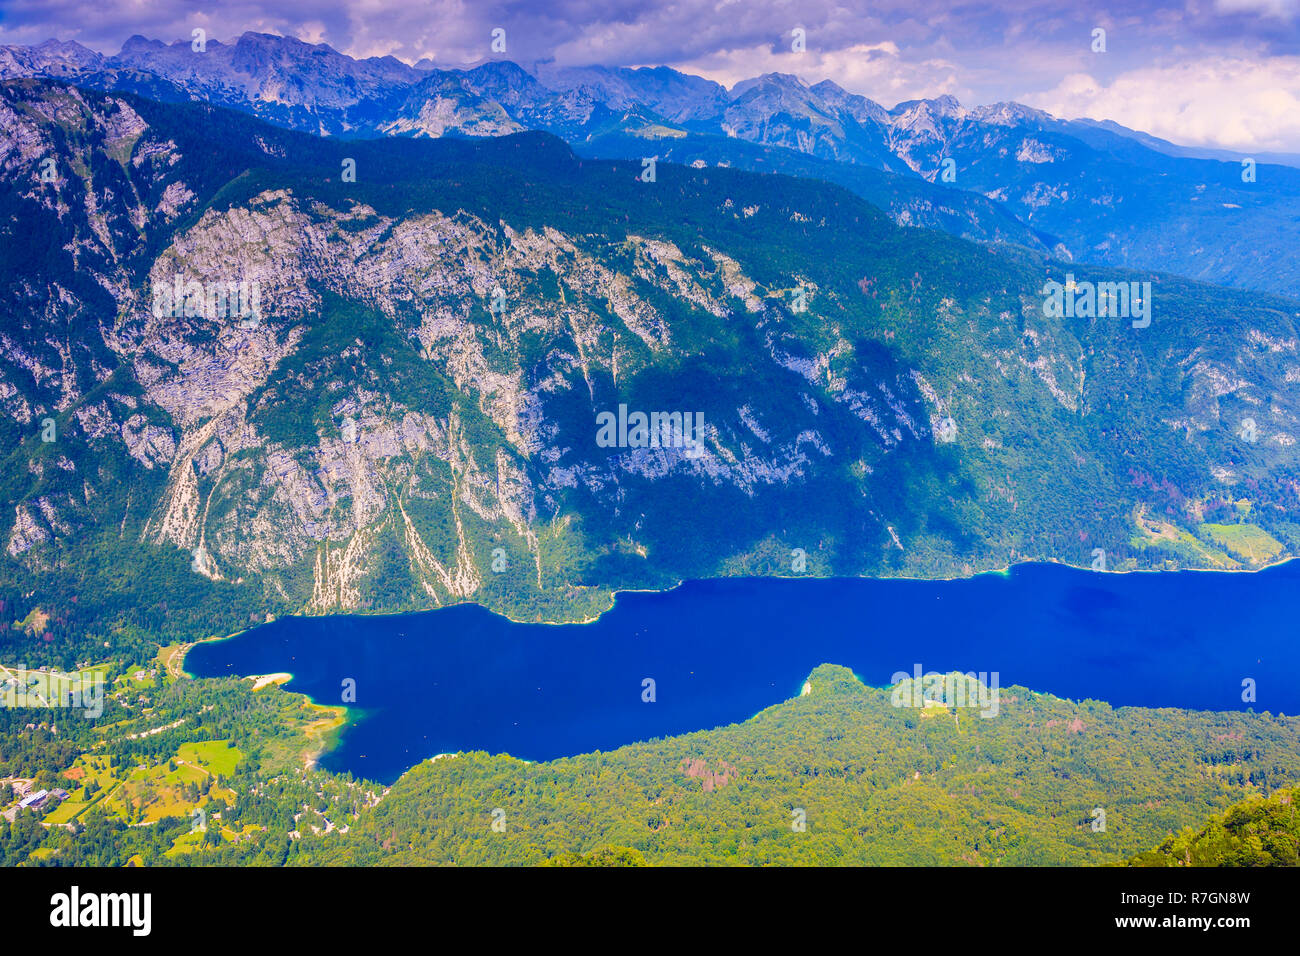 Lake and valley view. Stock Photo